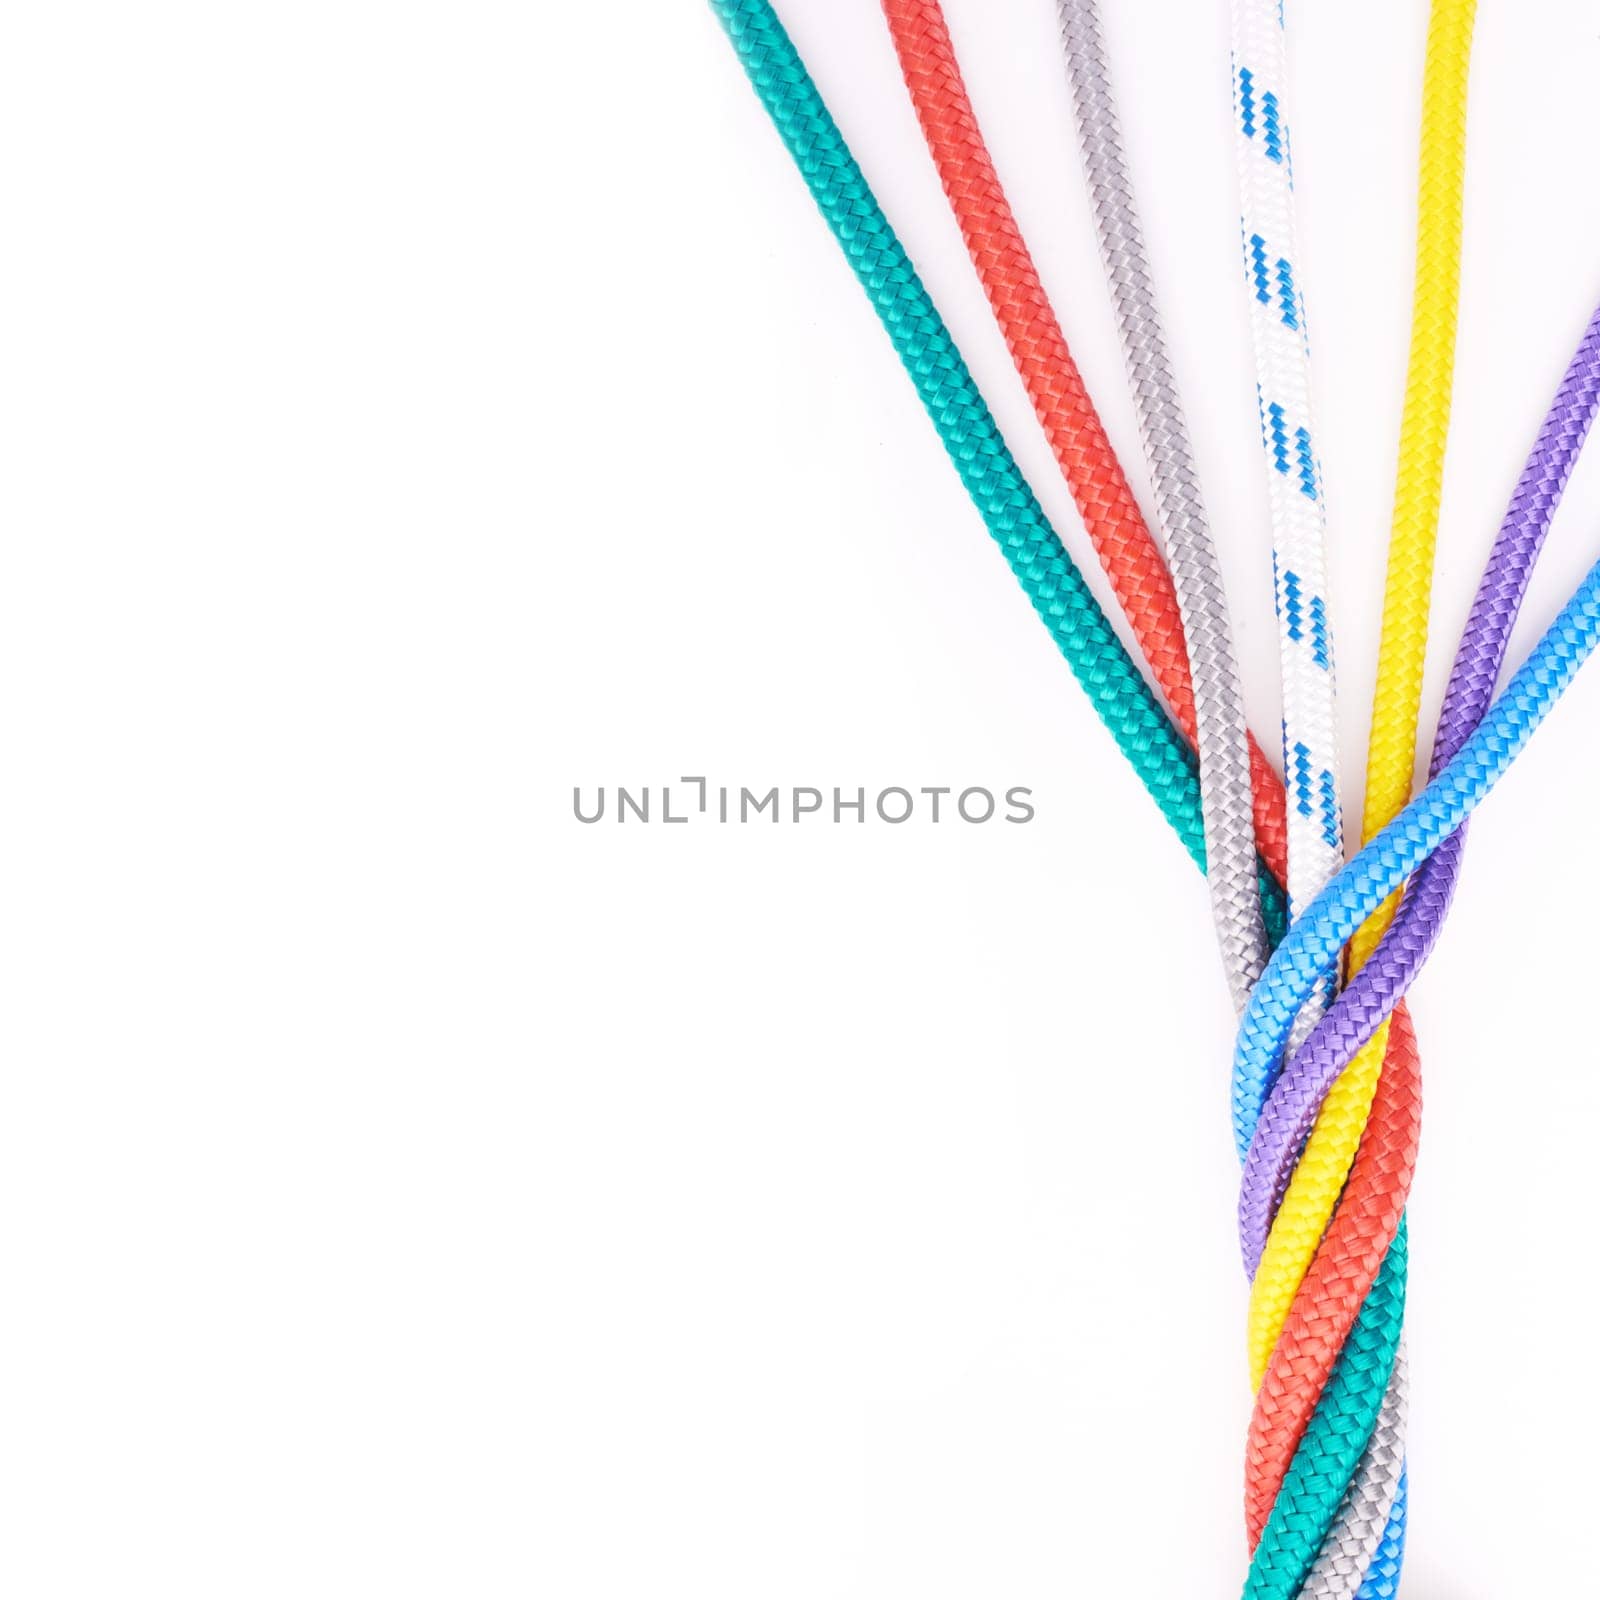 Rope, ties or connection of colorful knot or braid on white background in studio for security. Tools, cords and abstract unity of rainbow society with texture together for hiking, climbing or safety by YuriArcurs